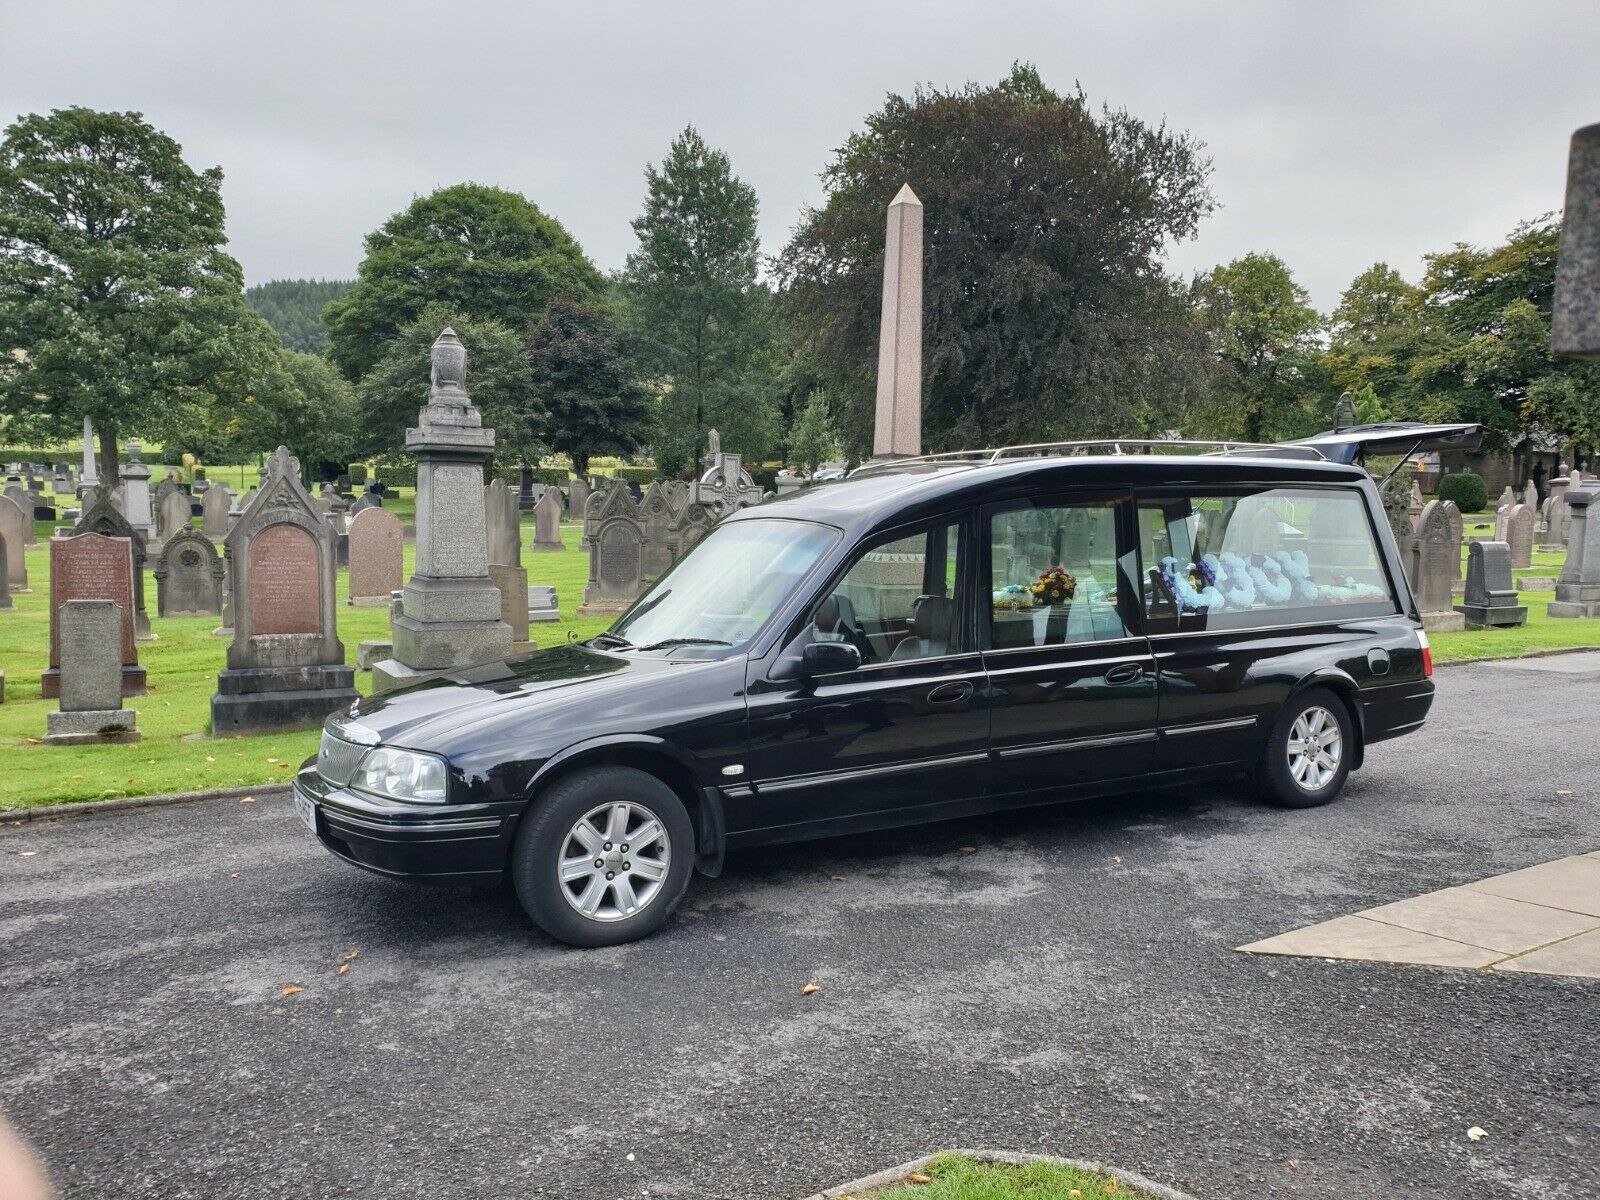 Hearse at Funeral